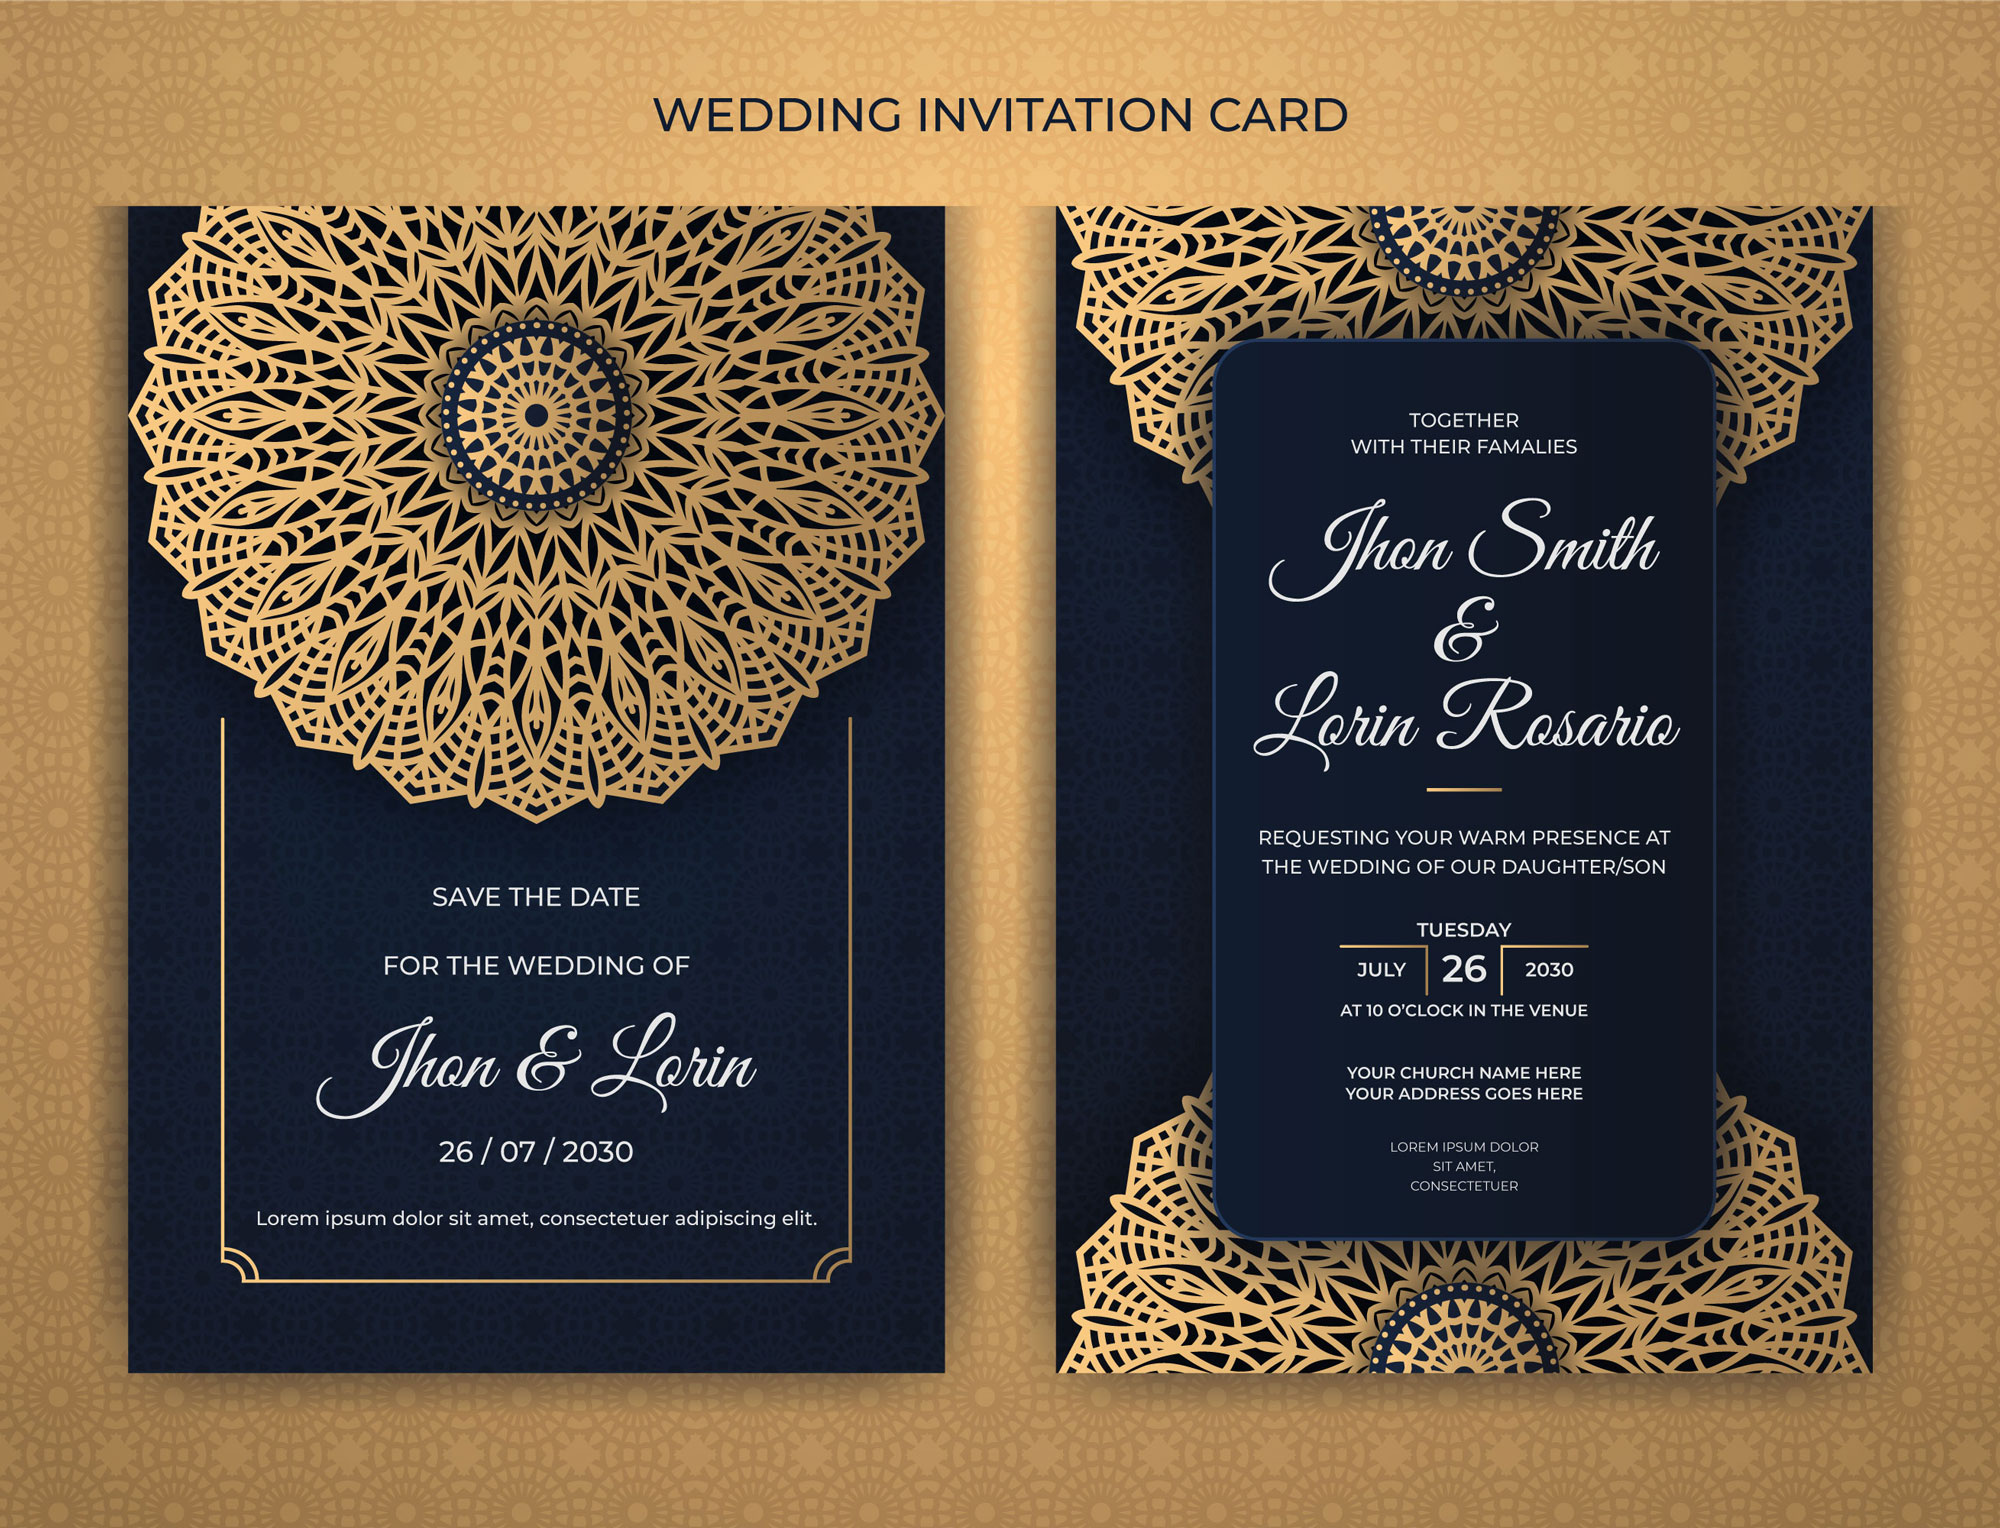 4 In One Luxury Wedding Invitation Card Design Only In $7